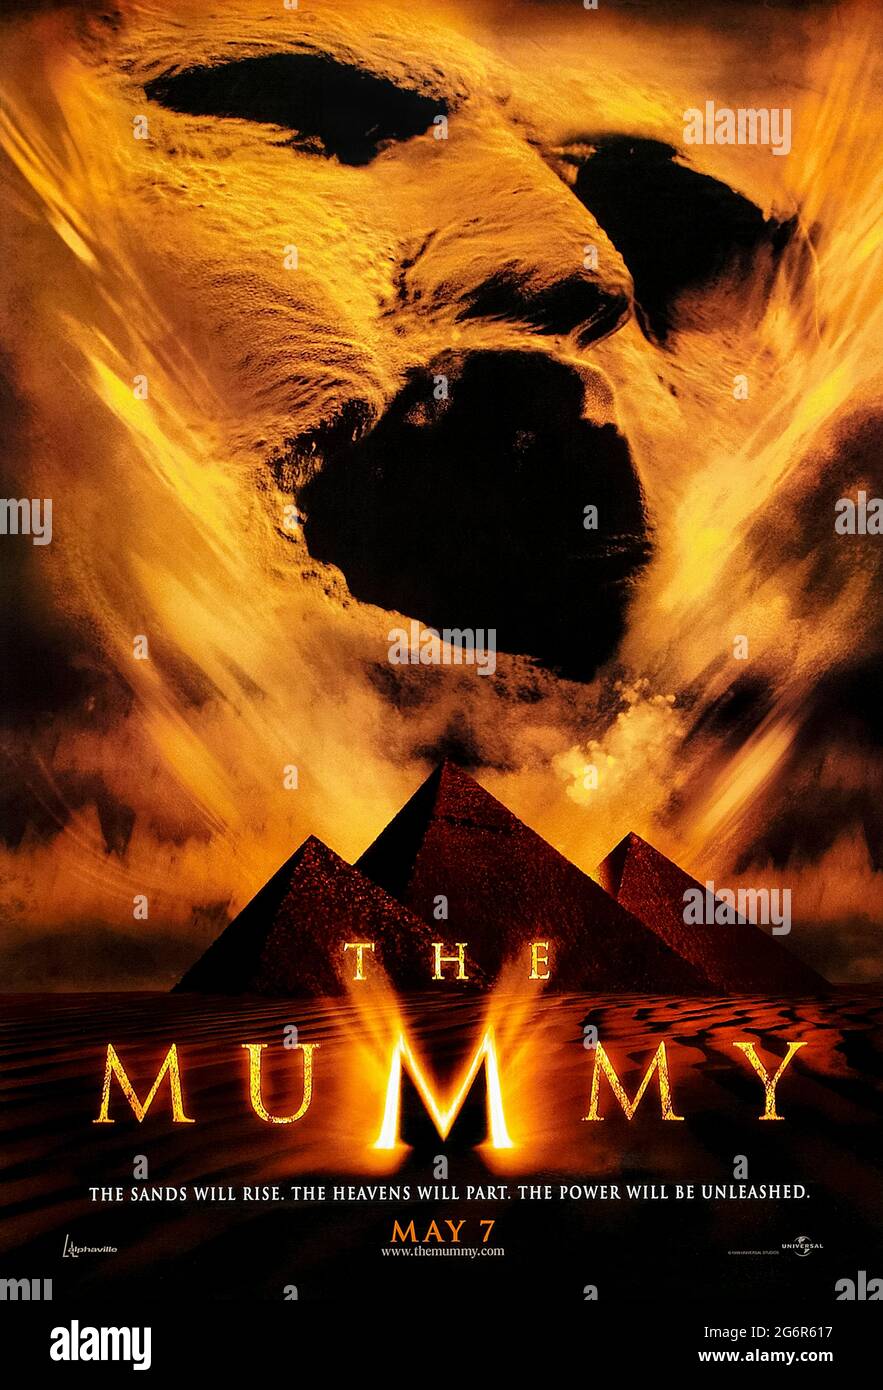 The Mummy (1999) directed by Stephen Sommers and starring Brendan Fraser, Rachel Weisz and John Hannah. Blockbuster remake of the 1932 film where the mummified corpse of an Egyptian priest, Imhotep is accidentally bought back to life. Stock Photo